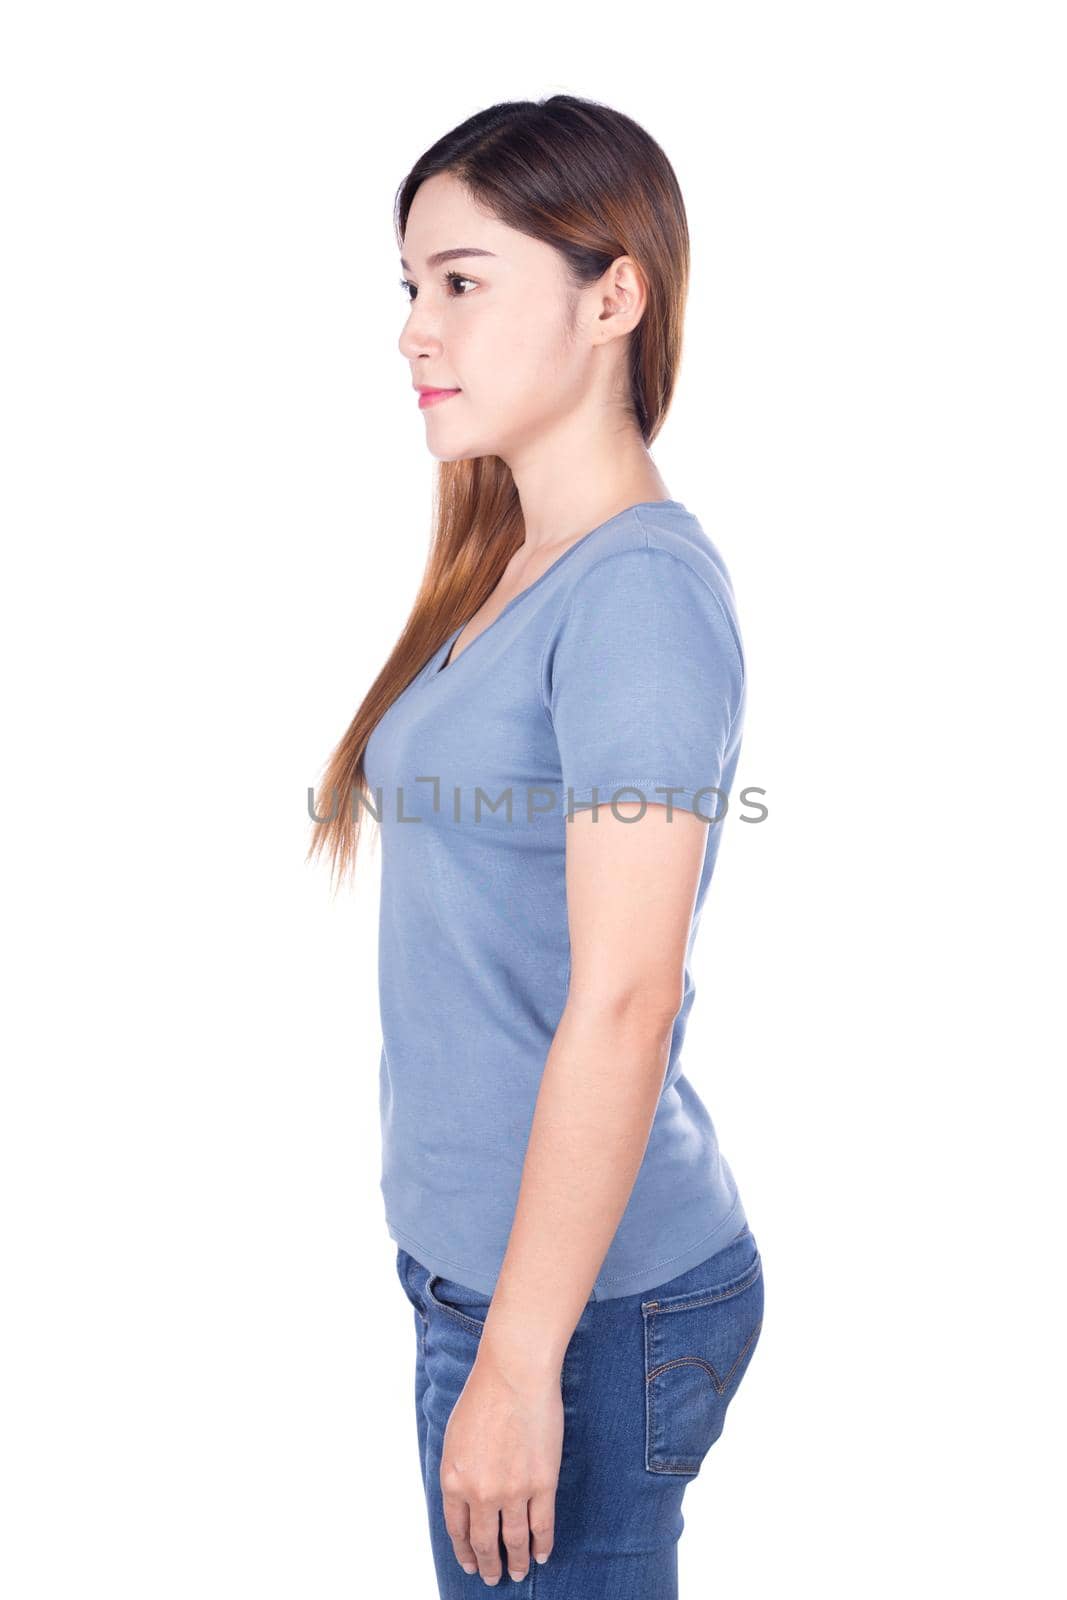 woman in blue t-shirt isolated on a white background (side view)